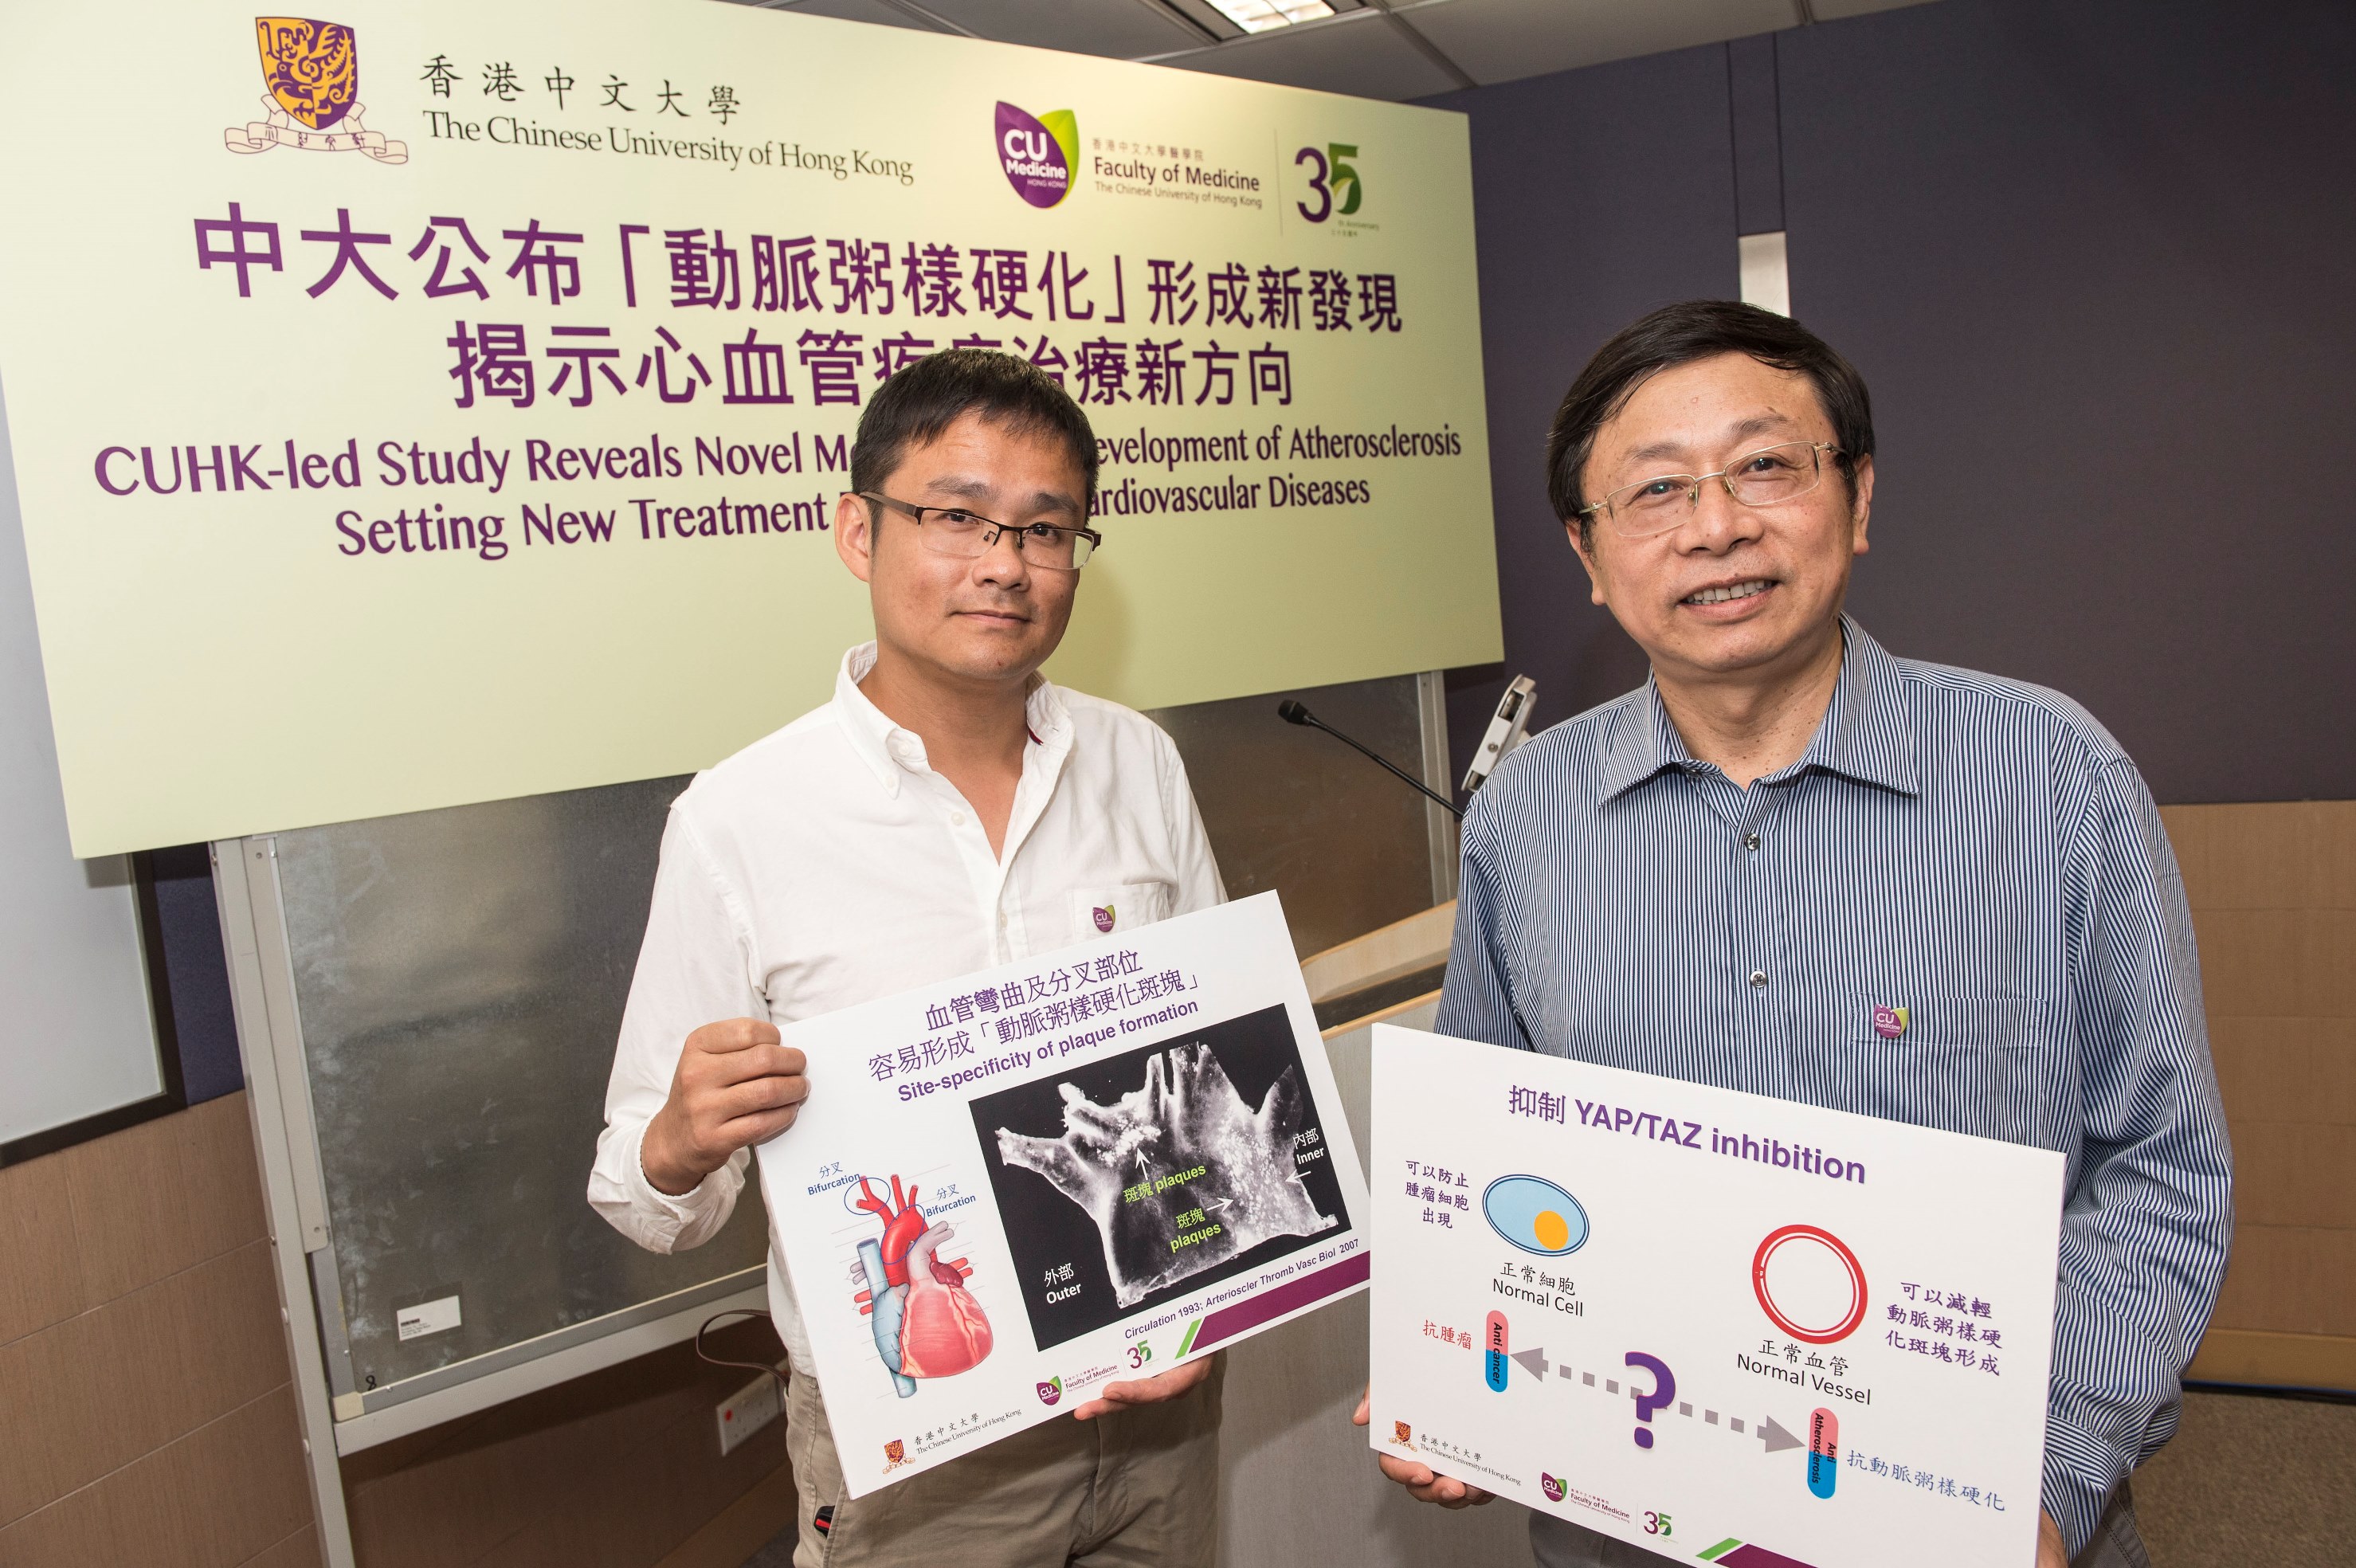 (Right) Prof. Yu HUANG, Professor of the School of Biomedical Sciences and Director of the Institute of Vascular Medicine & Dr. Li WANG, postdoctoral researcher of the School of Biomedical Sciences, Faculty of Medicine, CUHK. 